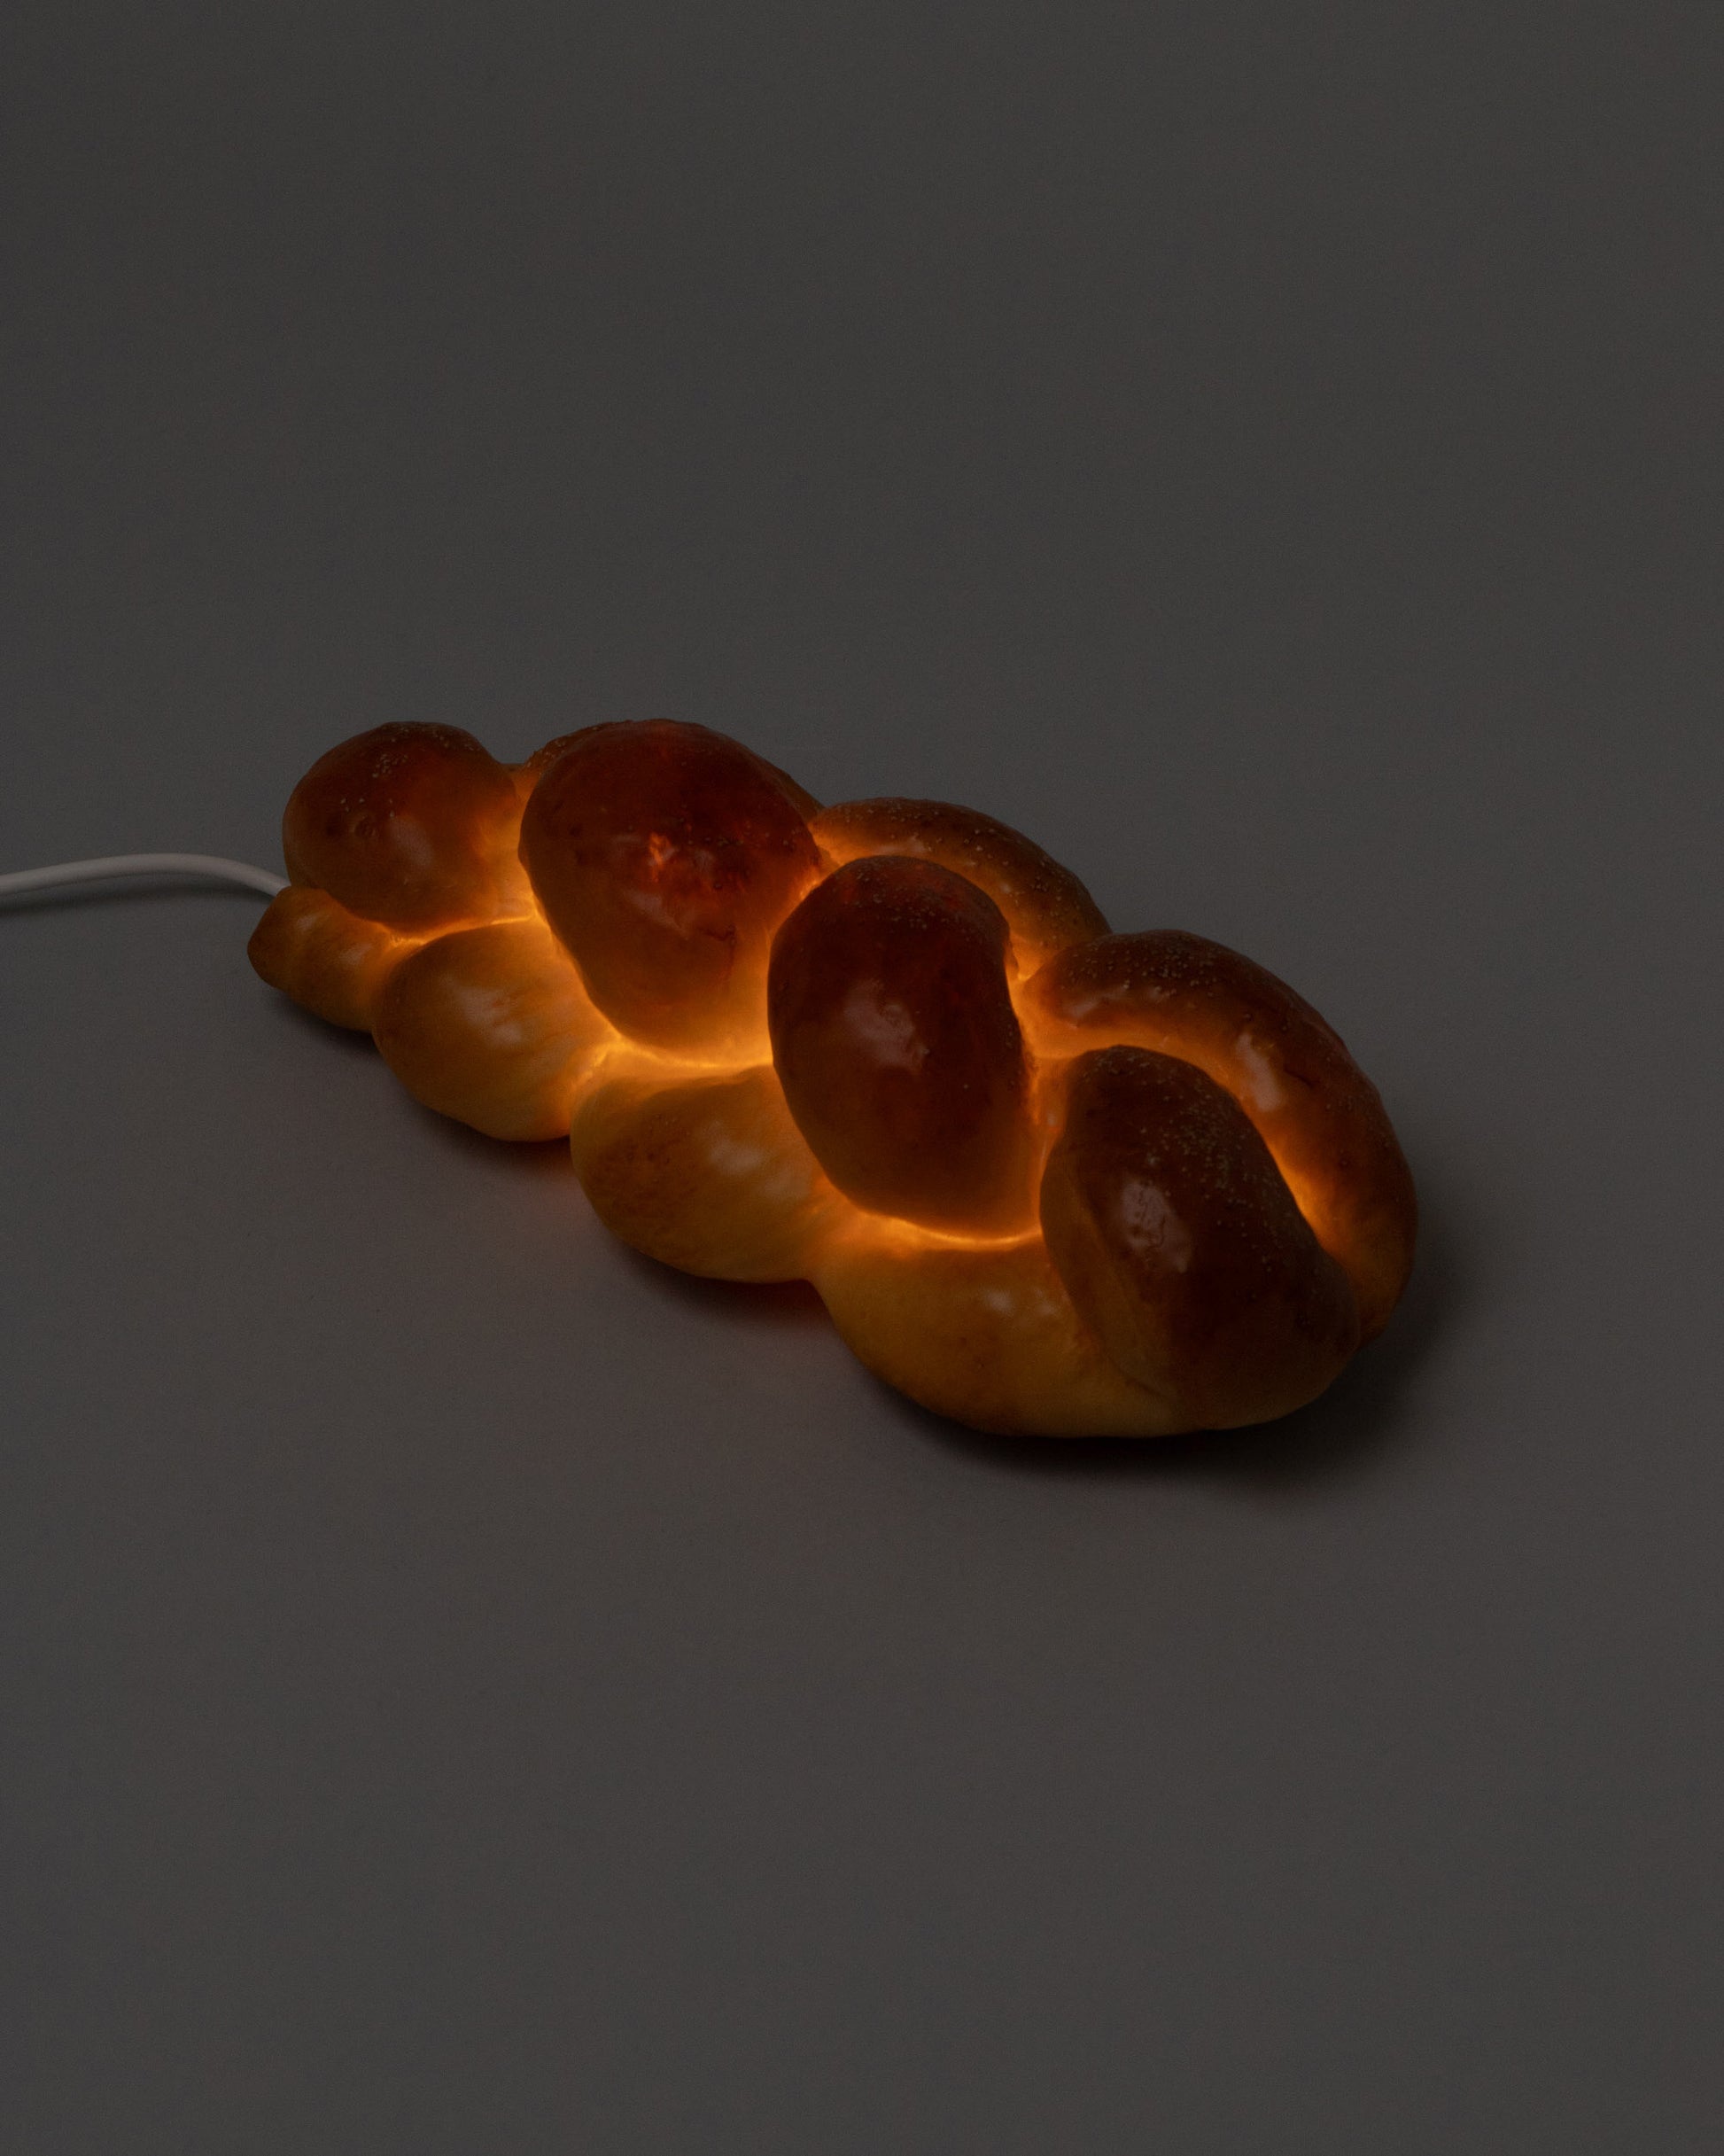 In-use detail view of the Pampshade Challah Lamp on light color background.